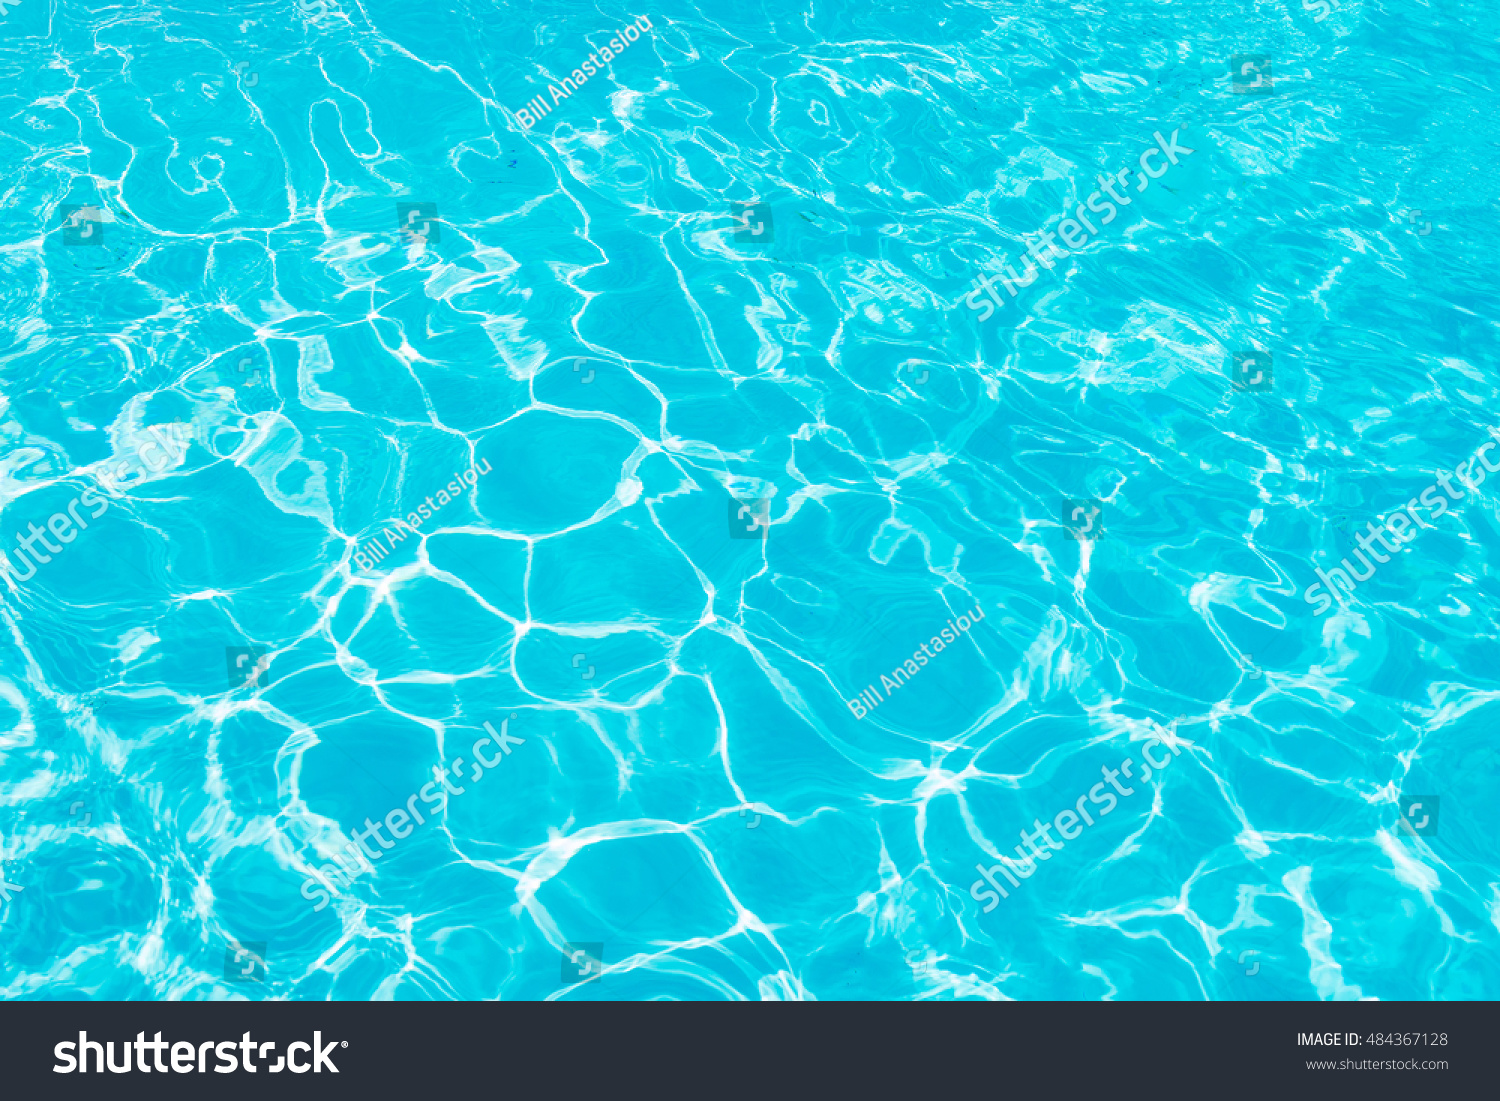 Pool water background with the sun reflecting. #484367128